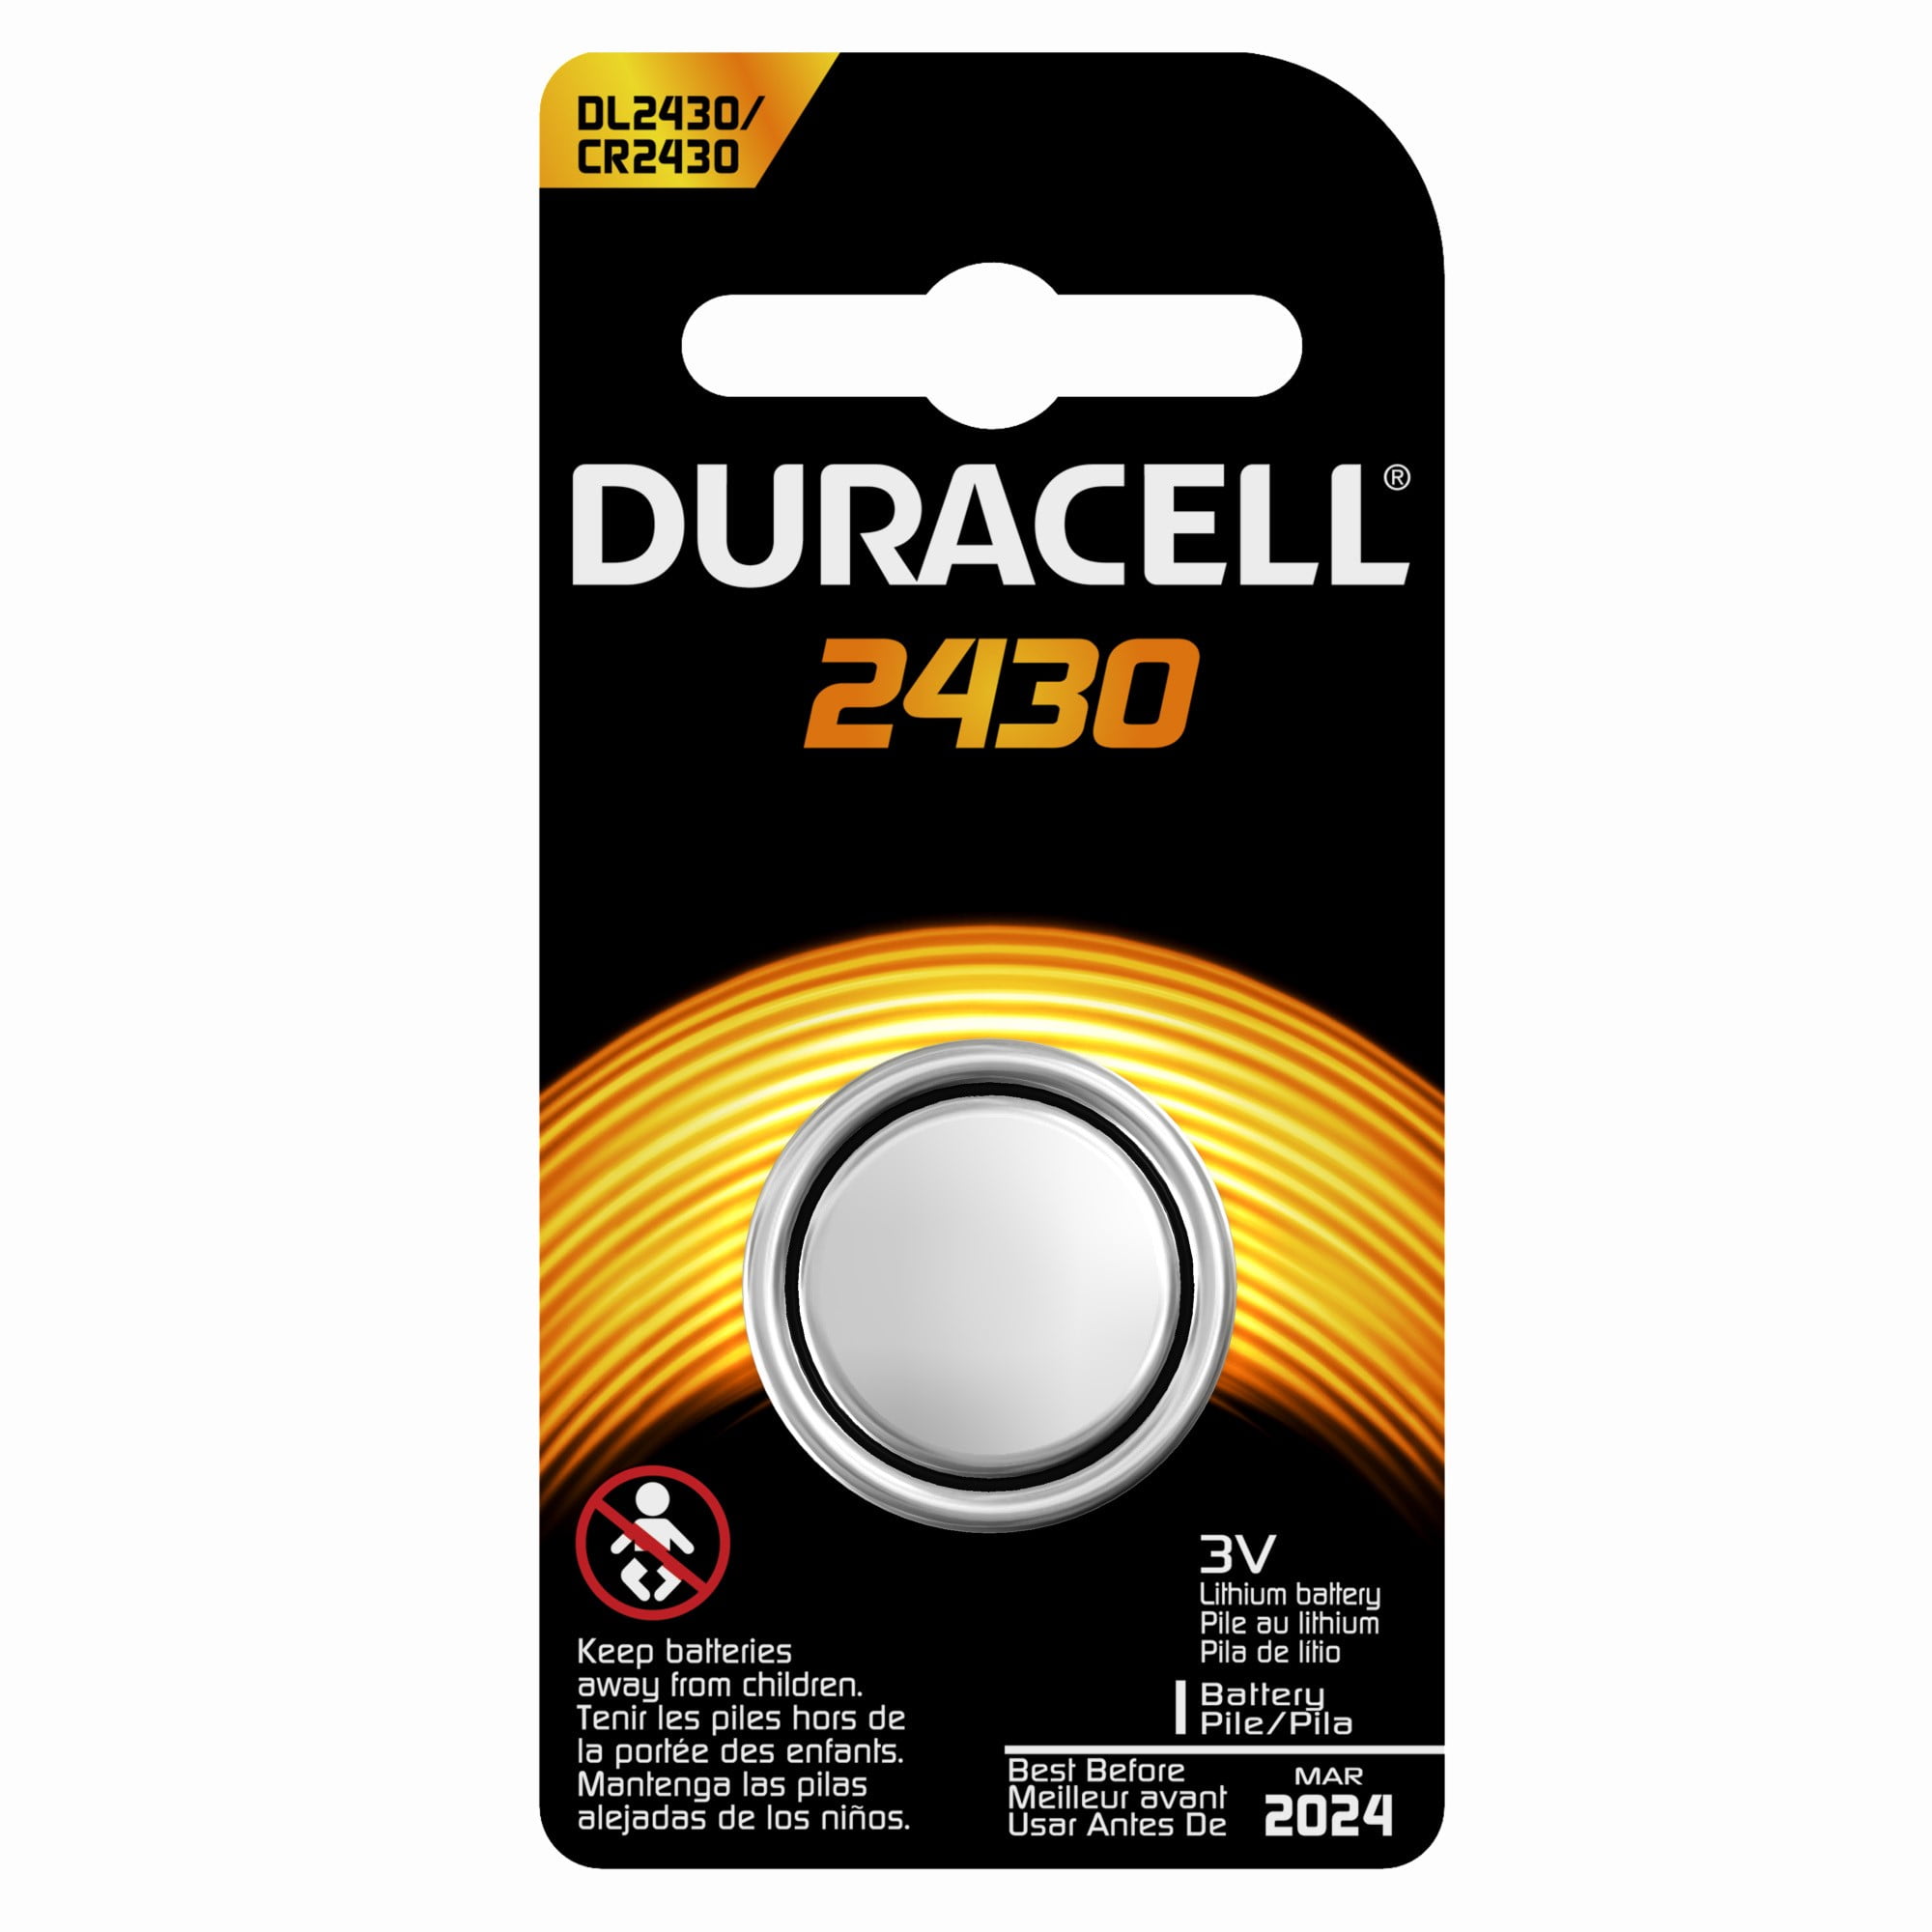 Duracell Lithium Battery, 2430, 3v - 8 ct